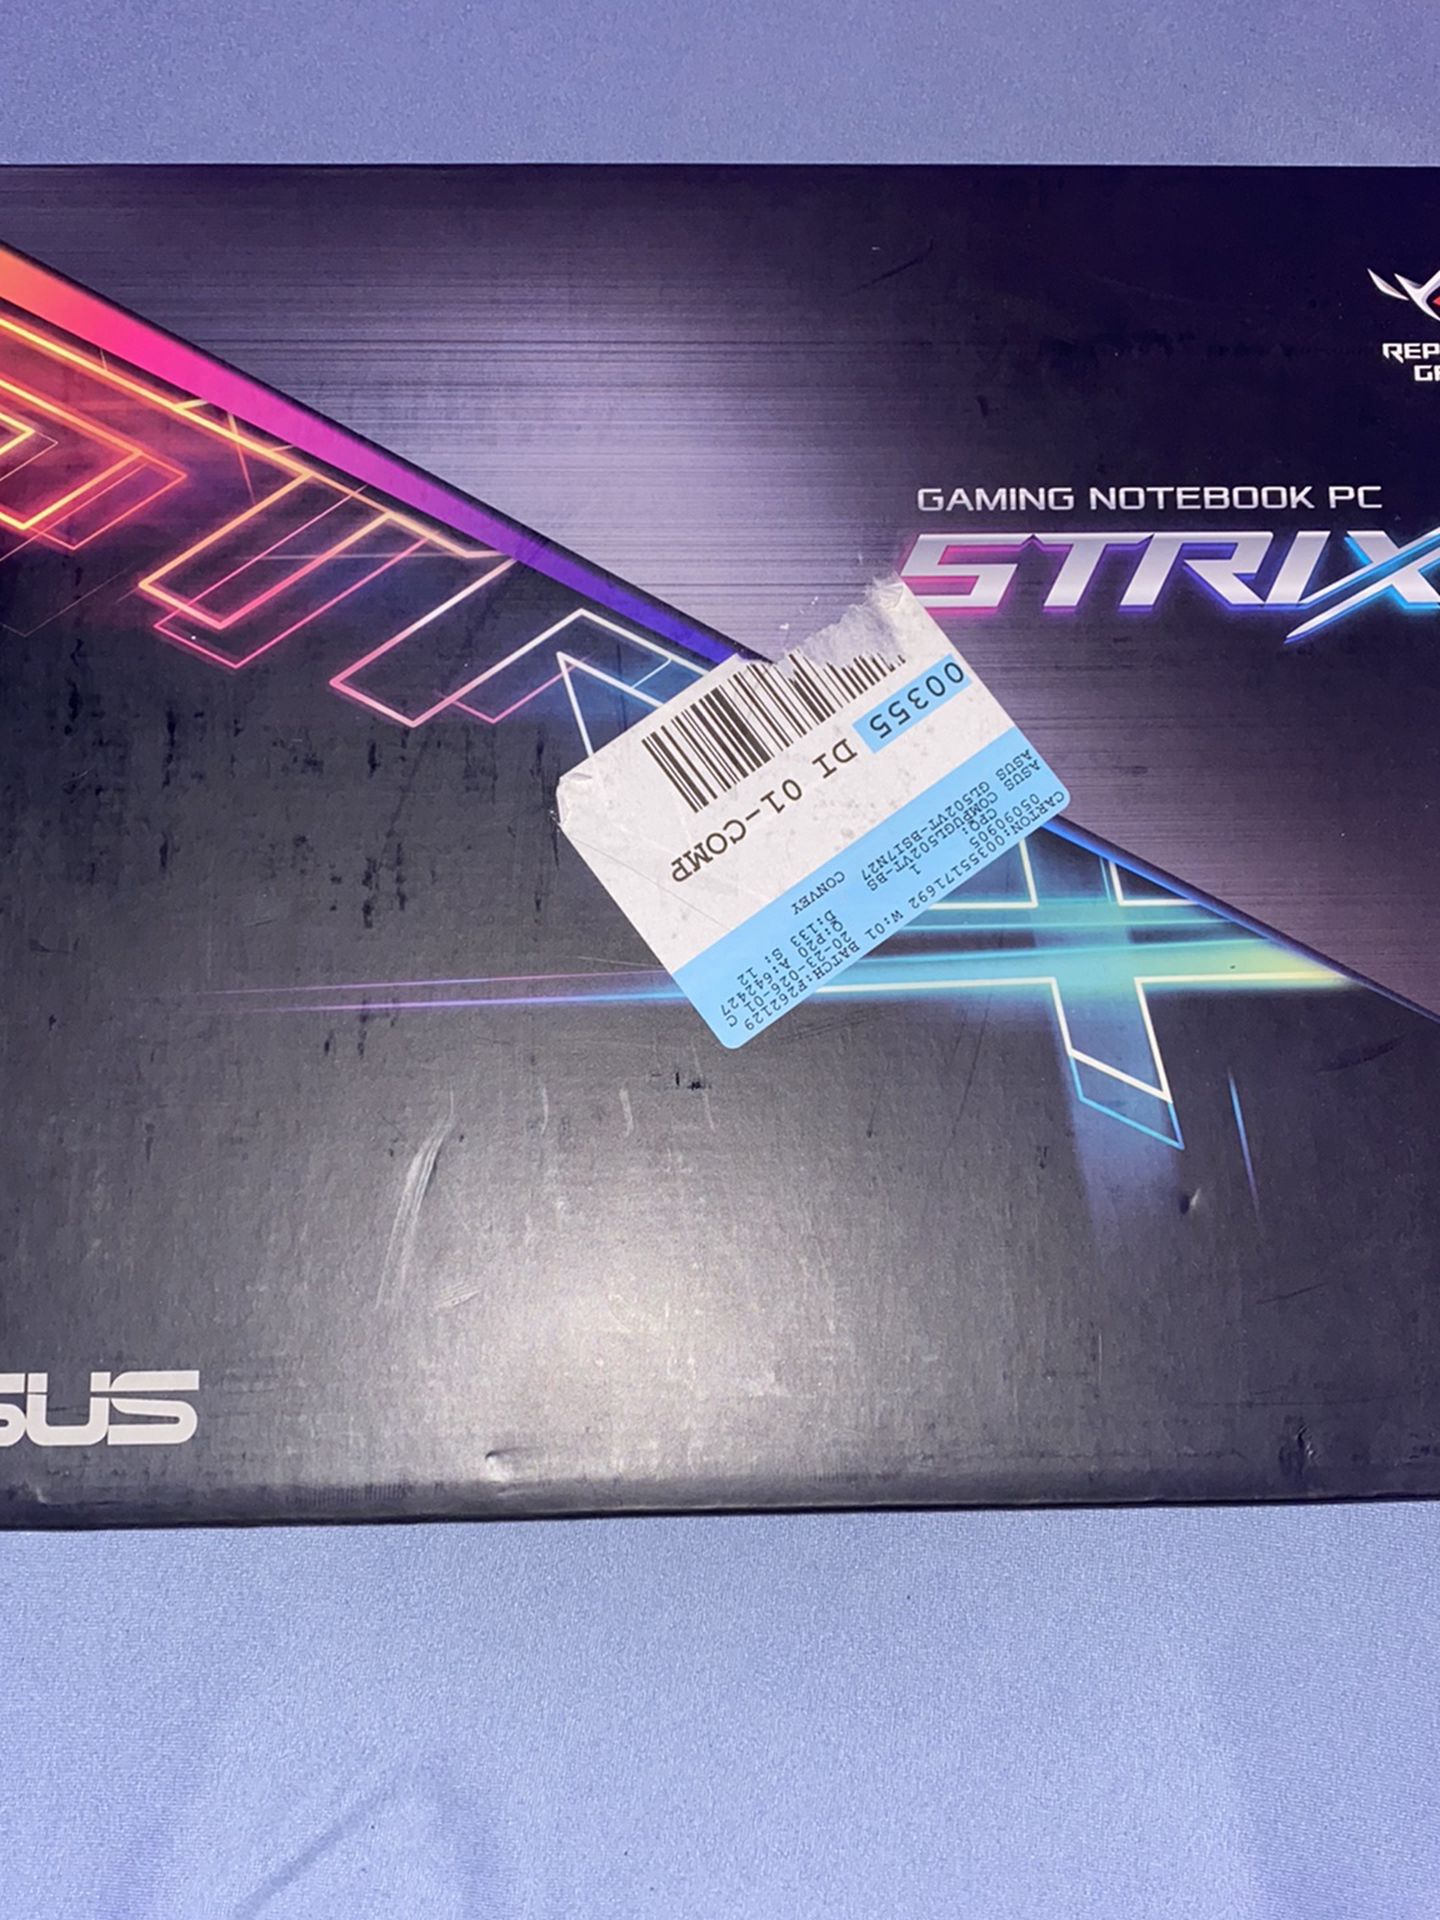 asus strix (gaming note book pc)